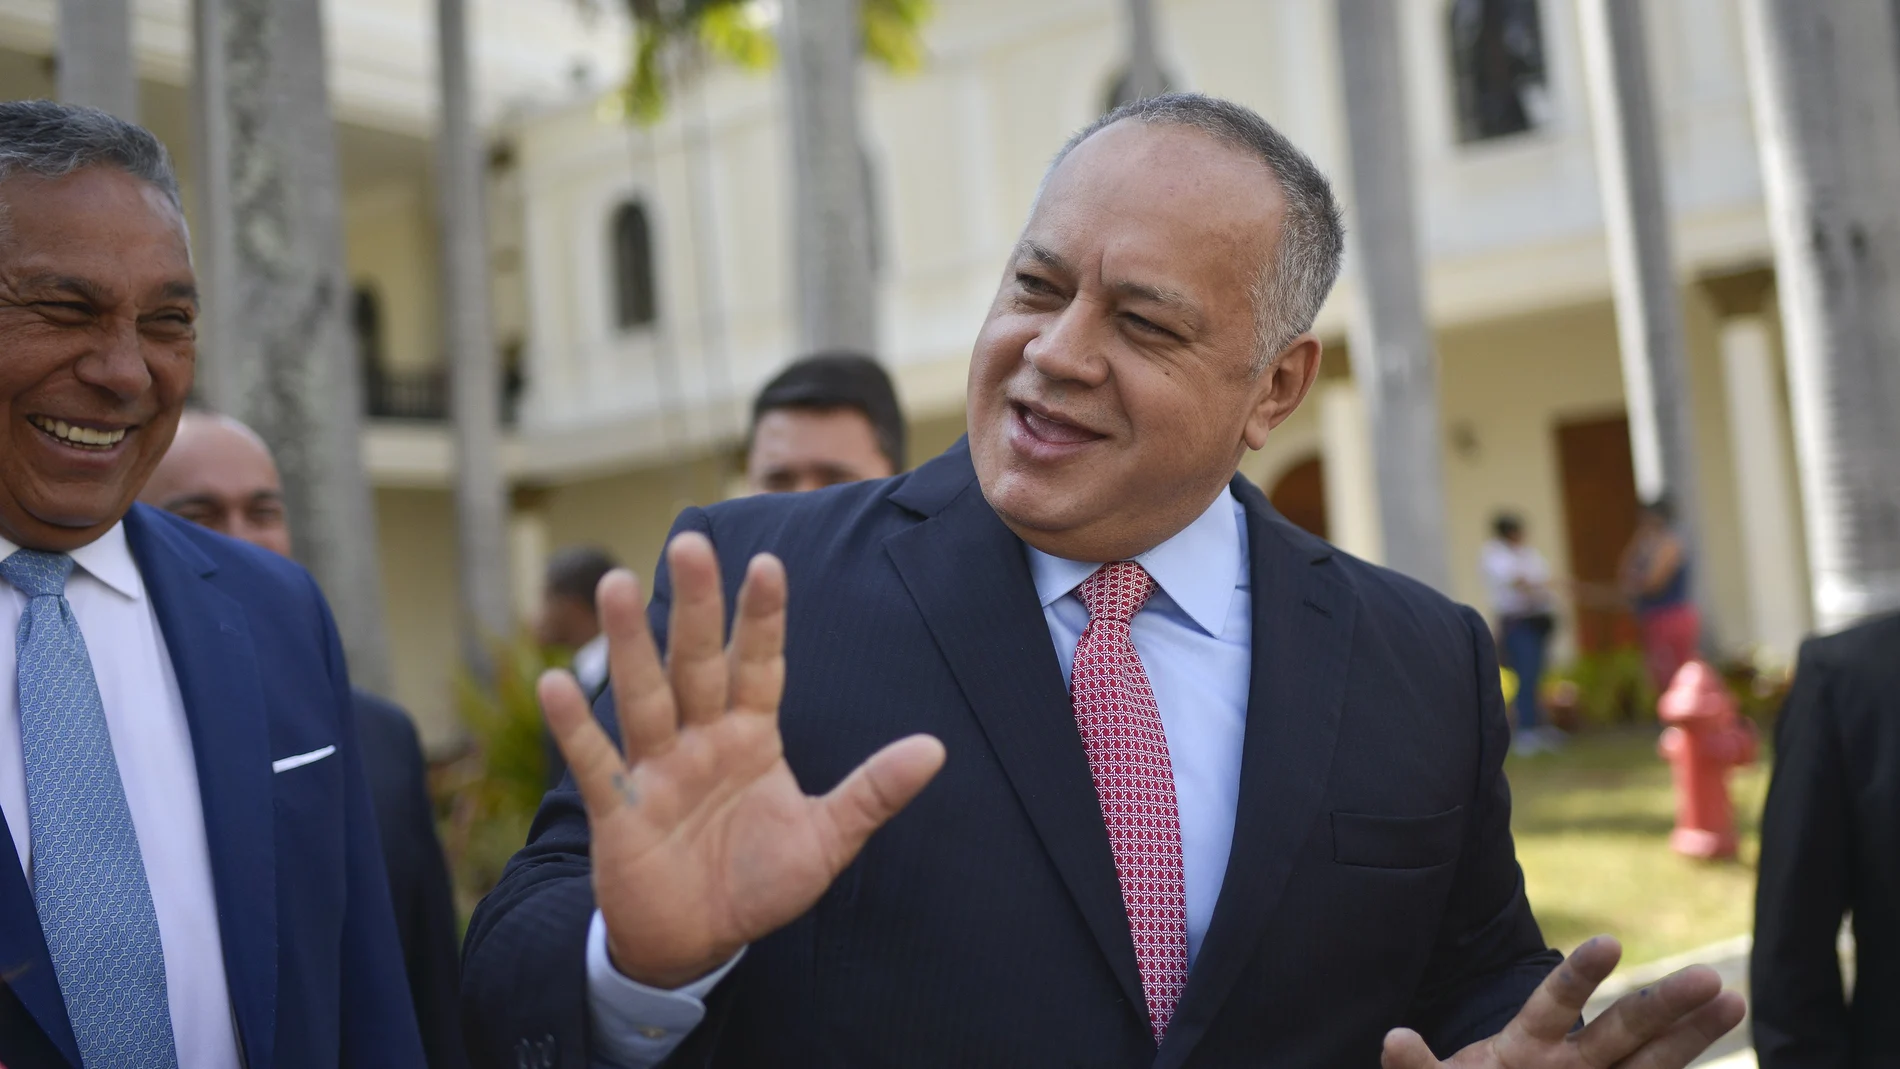 FILE- In this Jan. 8, 2020 file photo, Diosdado Cabello, president of the National Constituent Assembly, jokes with lawmakers after giving a press conference at the National Assembly in Caracas, Venezuela. Cabello has announced on Thursday, July 9, 2020, that he tested positive for COVID-19. (AP Photo/Matias Delacroix, File)